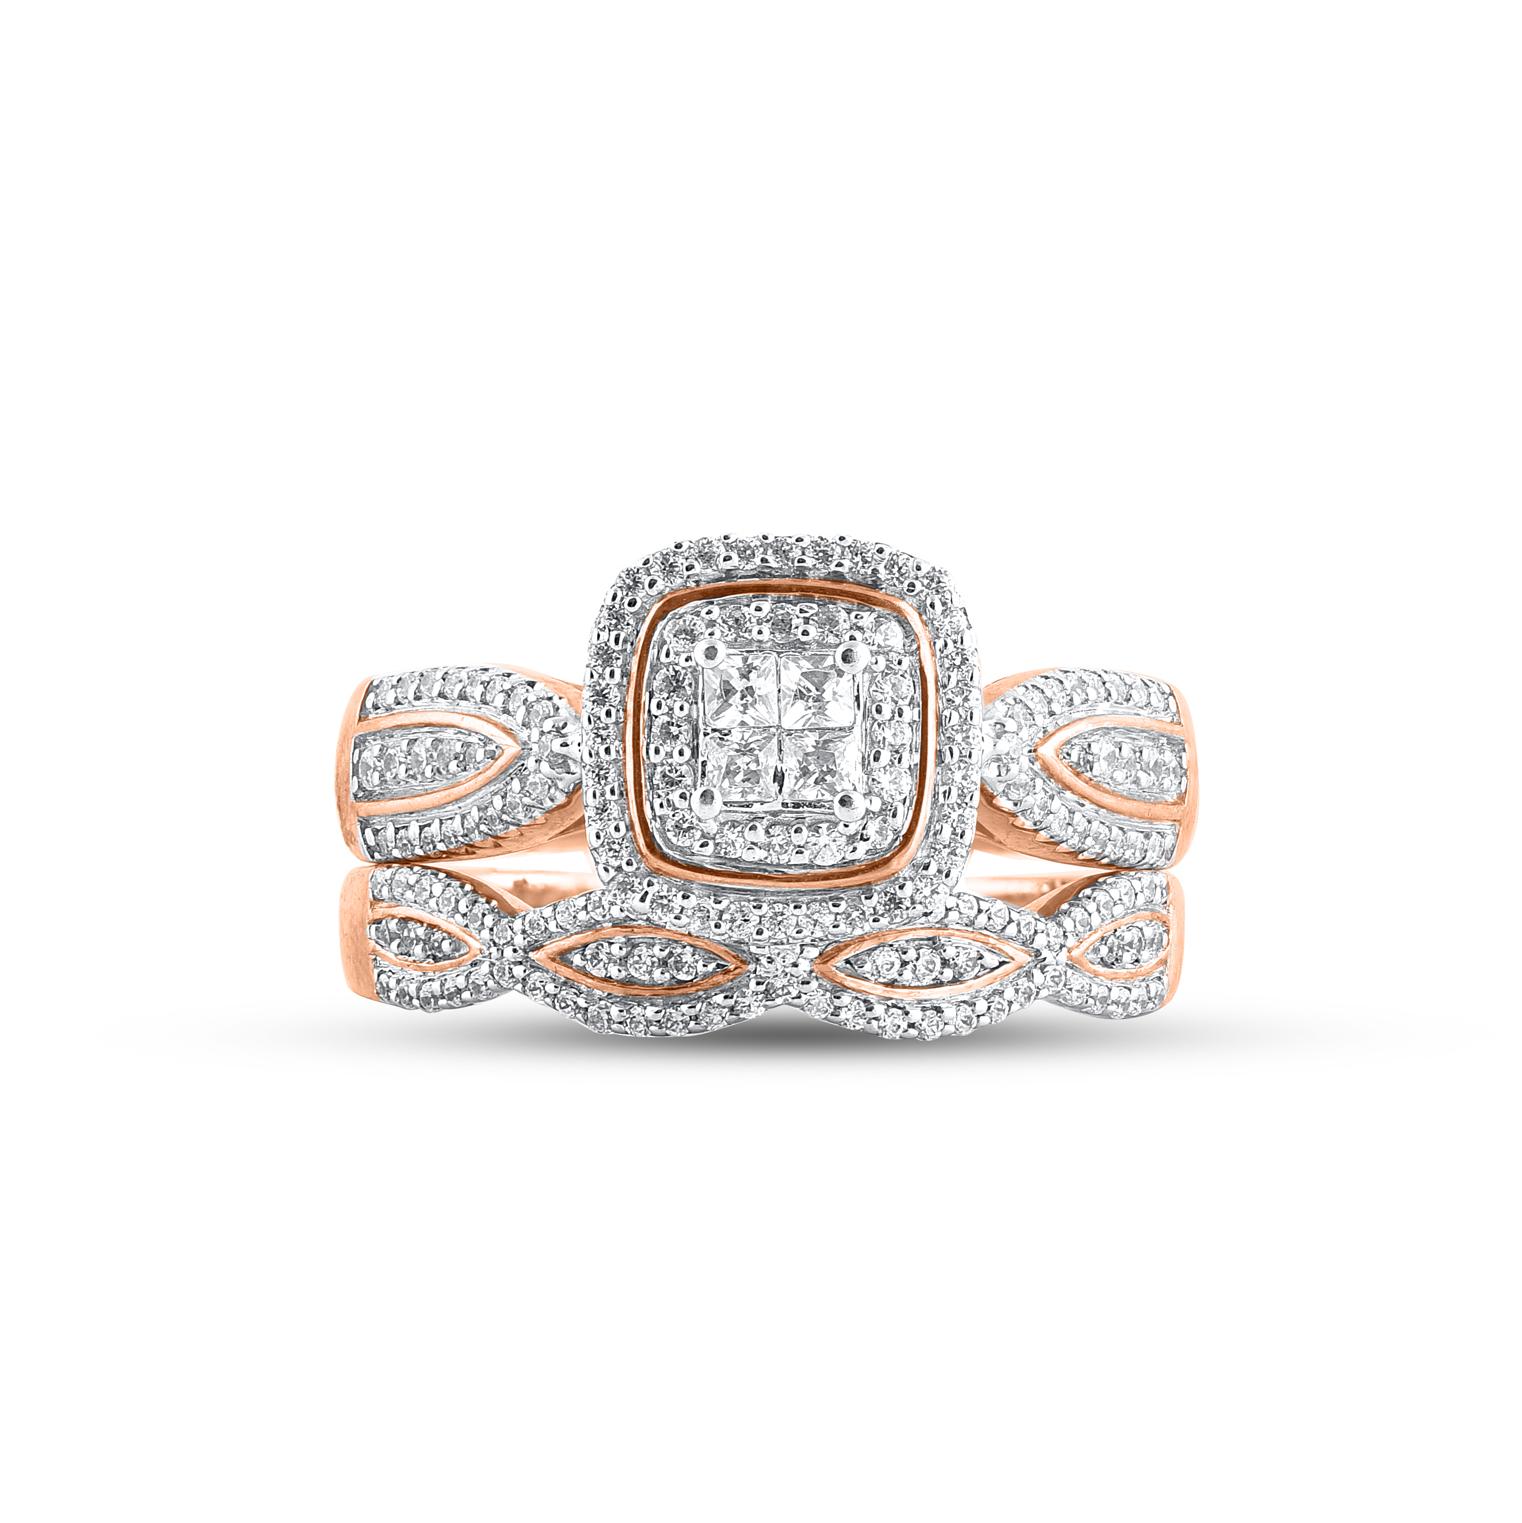 All of love's most precious moments shine through this romantic treasure. Crafted in 14 Karat rose gold. This wedding ring features a sparkling 162 brilliant cut, single cut round diamonds and princess cut diamonds beautifully set in prong, pave and